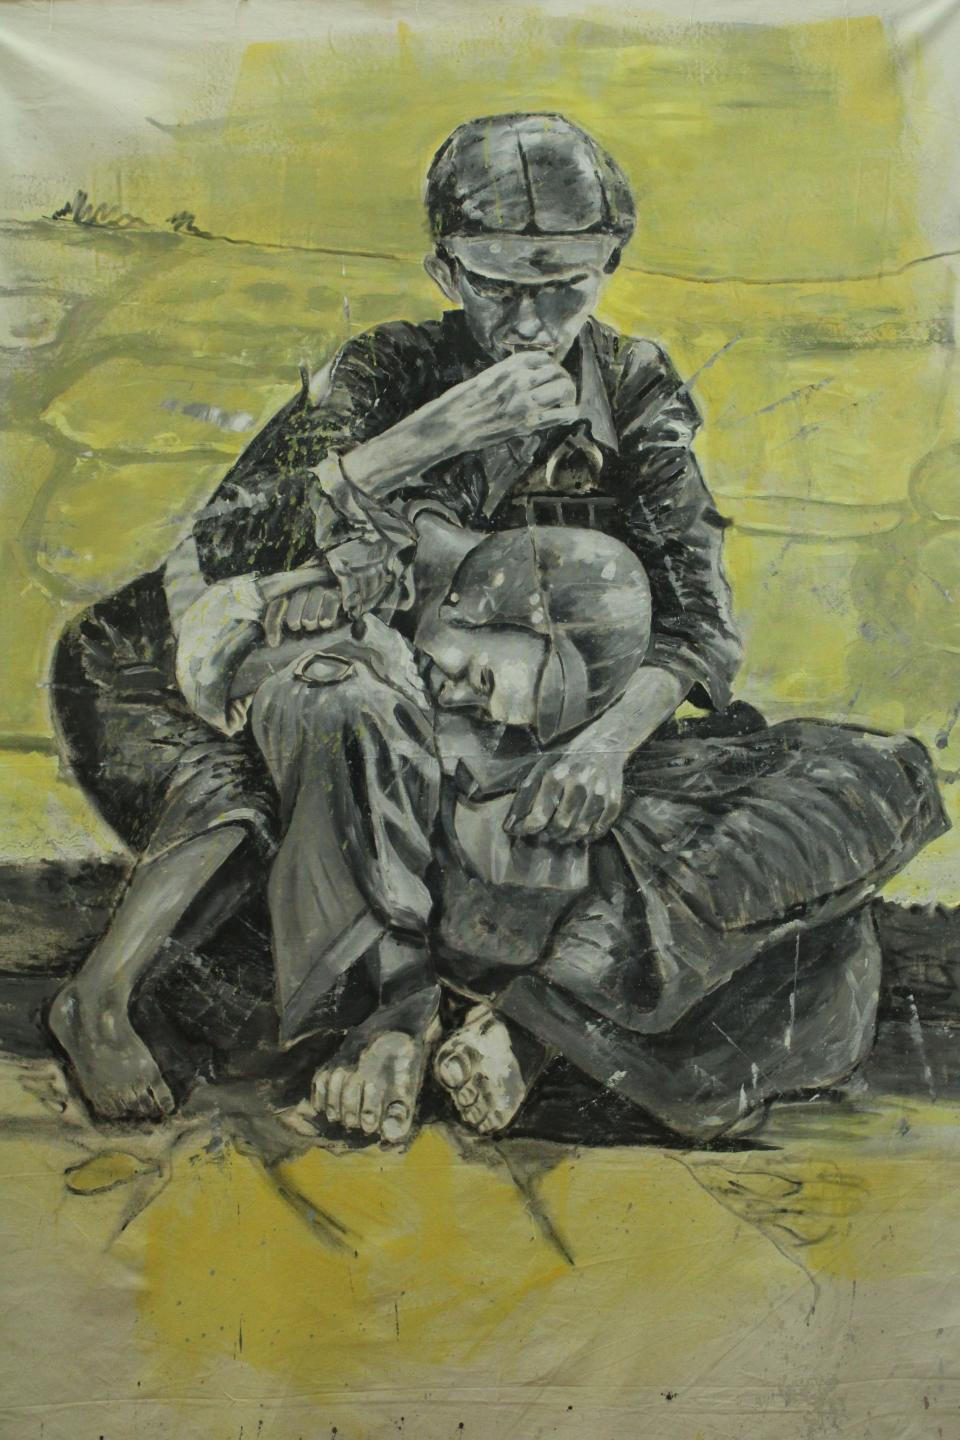 Learn more about the Holocaust this weekend through the perspective of artist Mark Cohen during the final days of the Armory Art Center’s “A Legacy of Remembrance” exhibition. This piece by Cohen is titled “Warsaw Ghetto Brothers.”